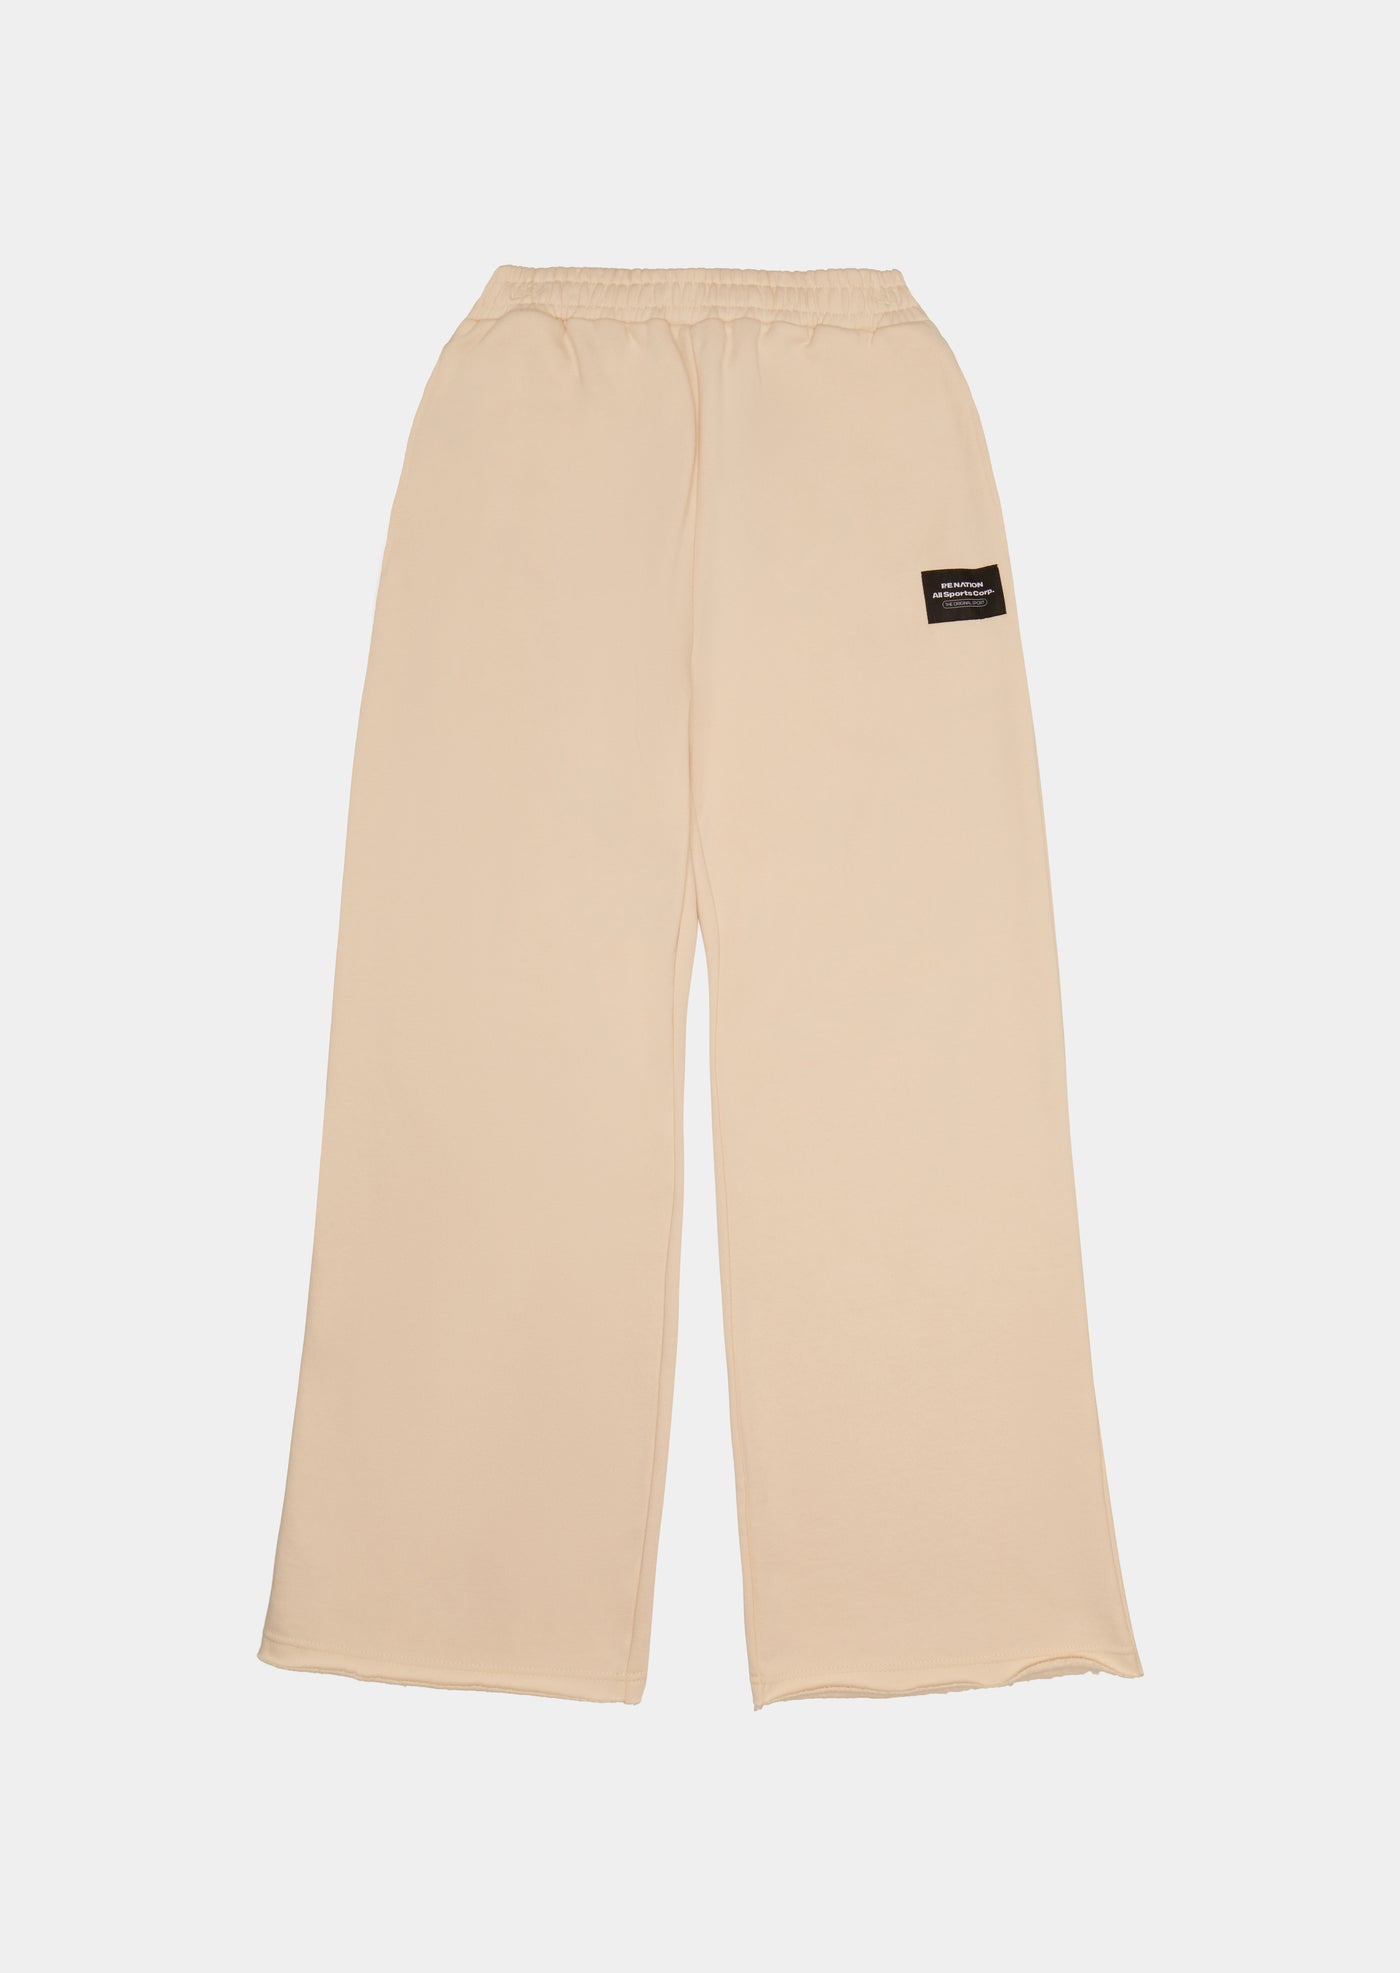 OFF DUTY TRACKPANT IN PEARLED IVORY